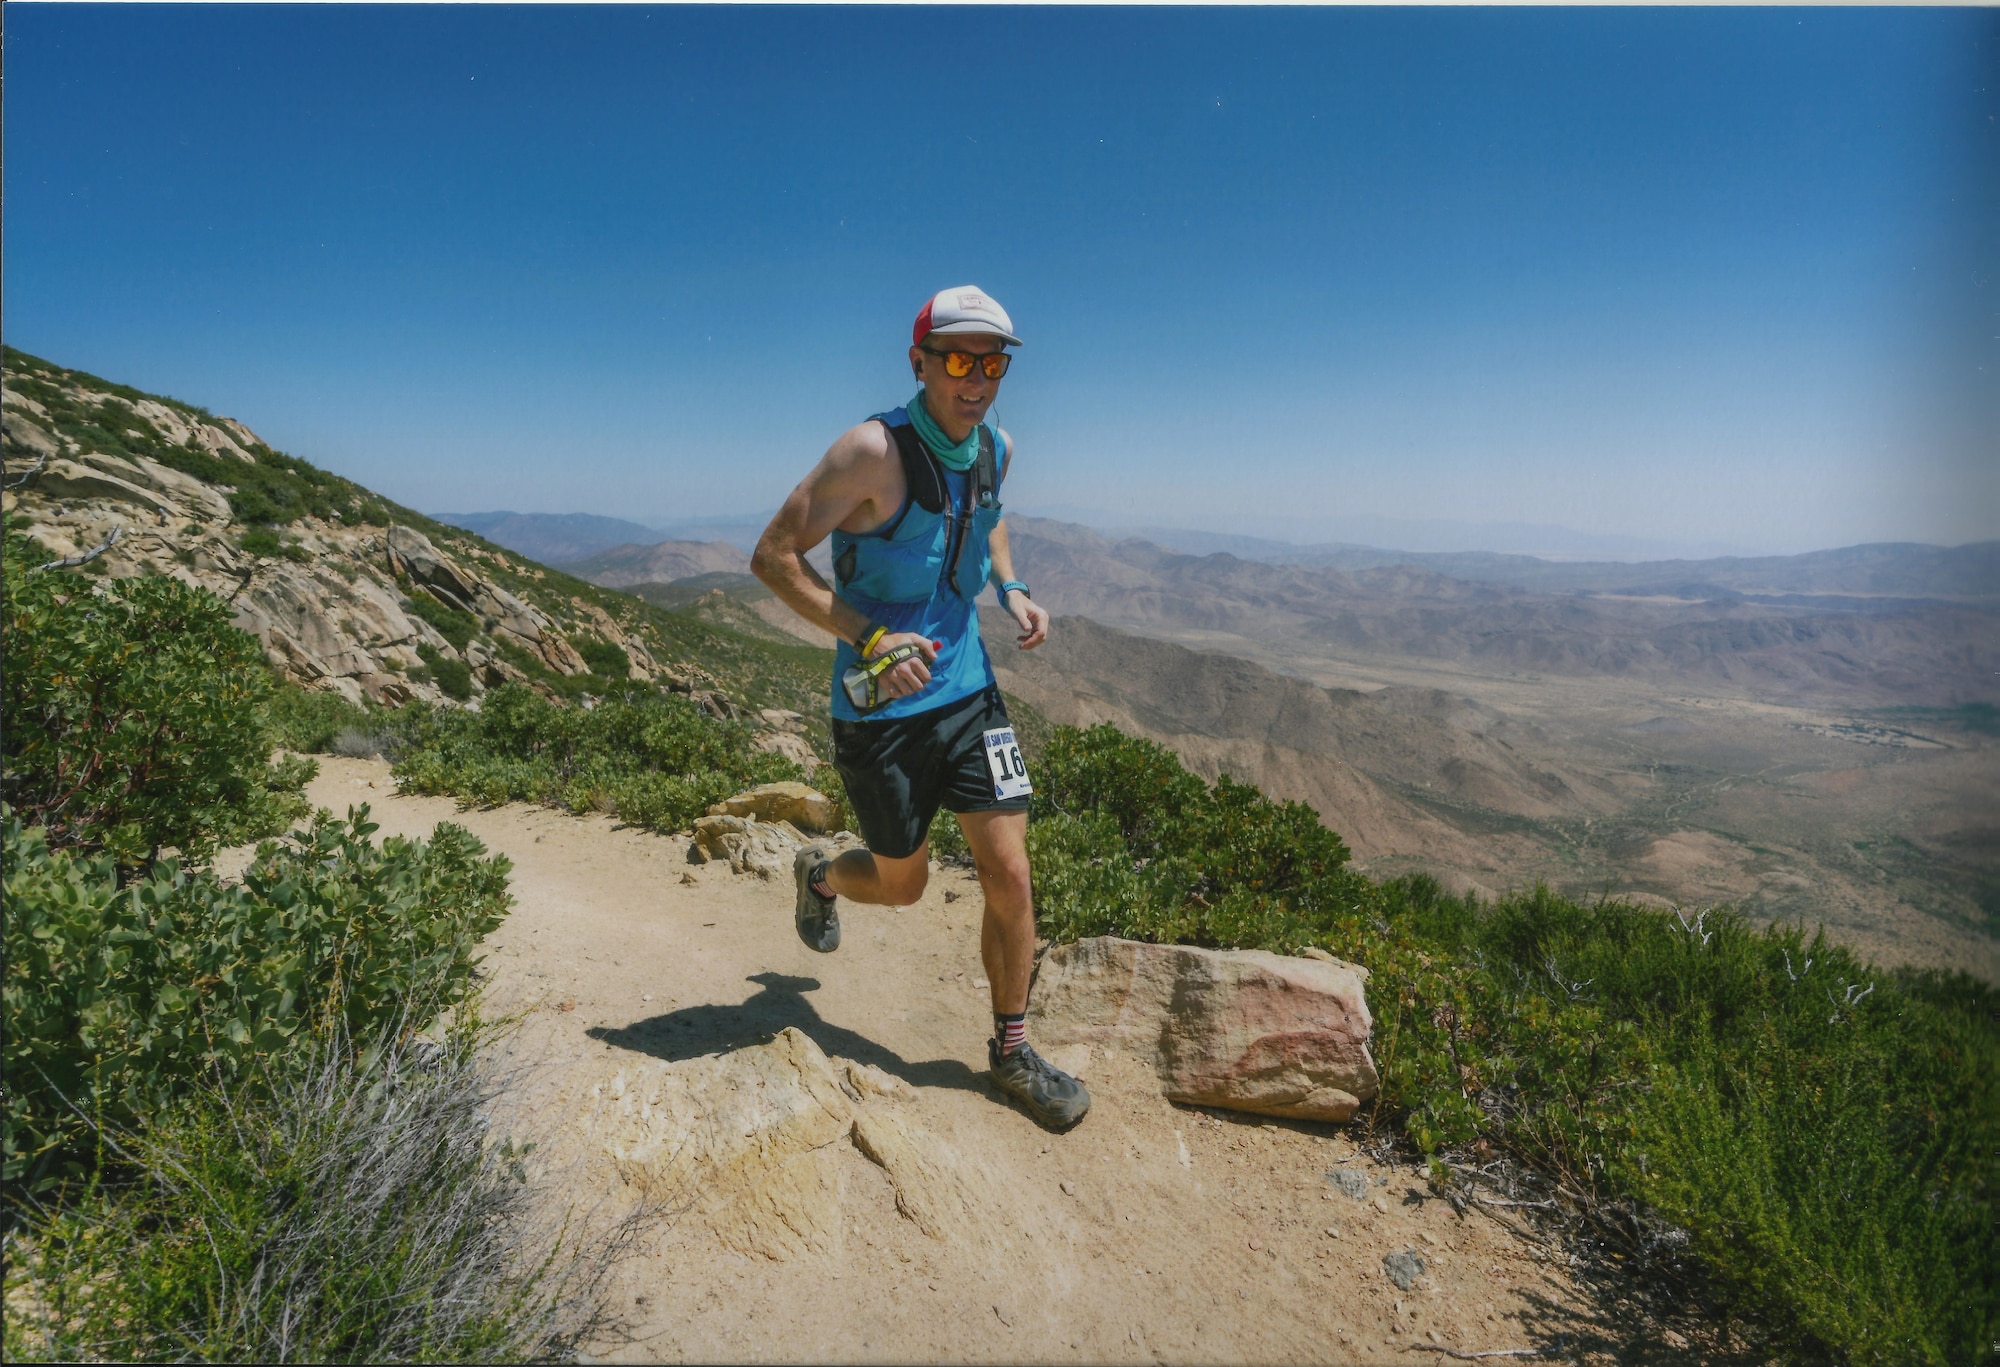 1st Lt. Krosby Keller, 225th Air Defense Squadron air battle manager, runs the San Diego 100 ultra marathon June 8, 2018.  The San Diego 100 is a mountain race that takes place east of San Diego in June every year that runs through the Pacific Coast Trail and Cuyamaca State Park.